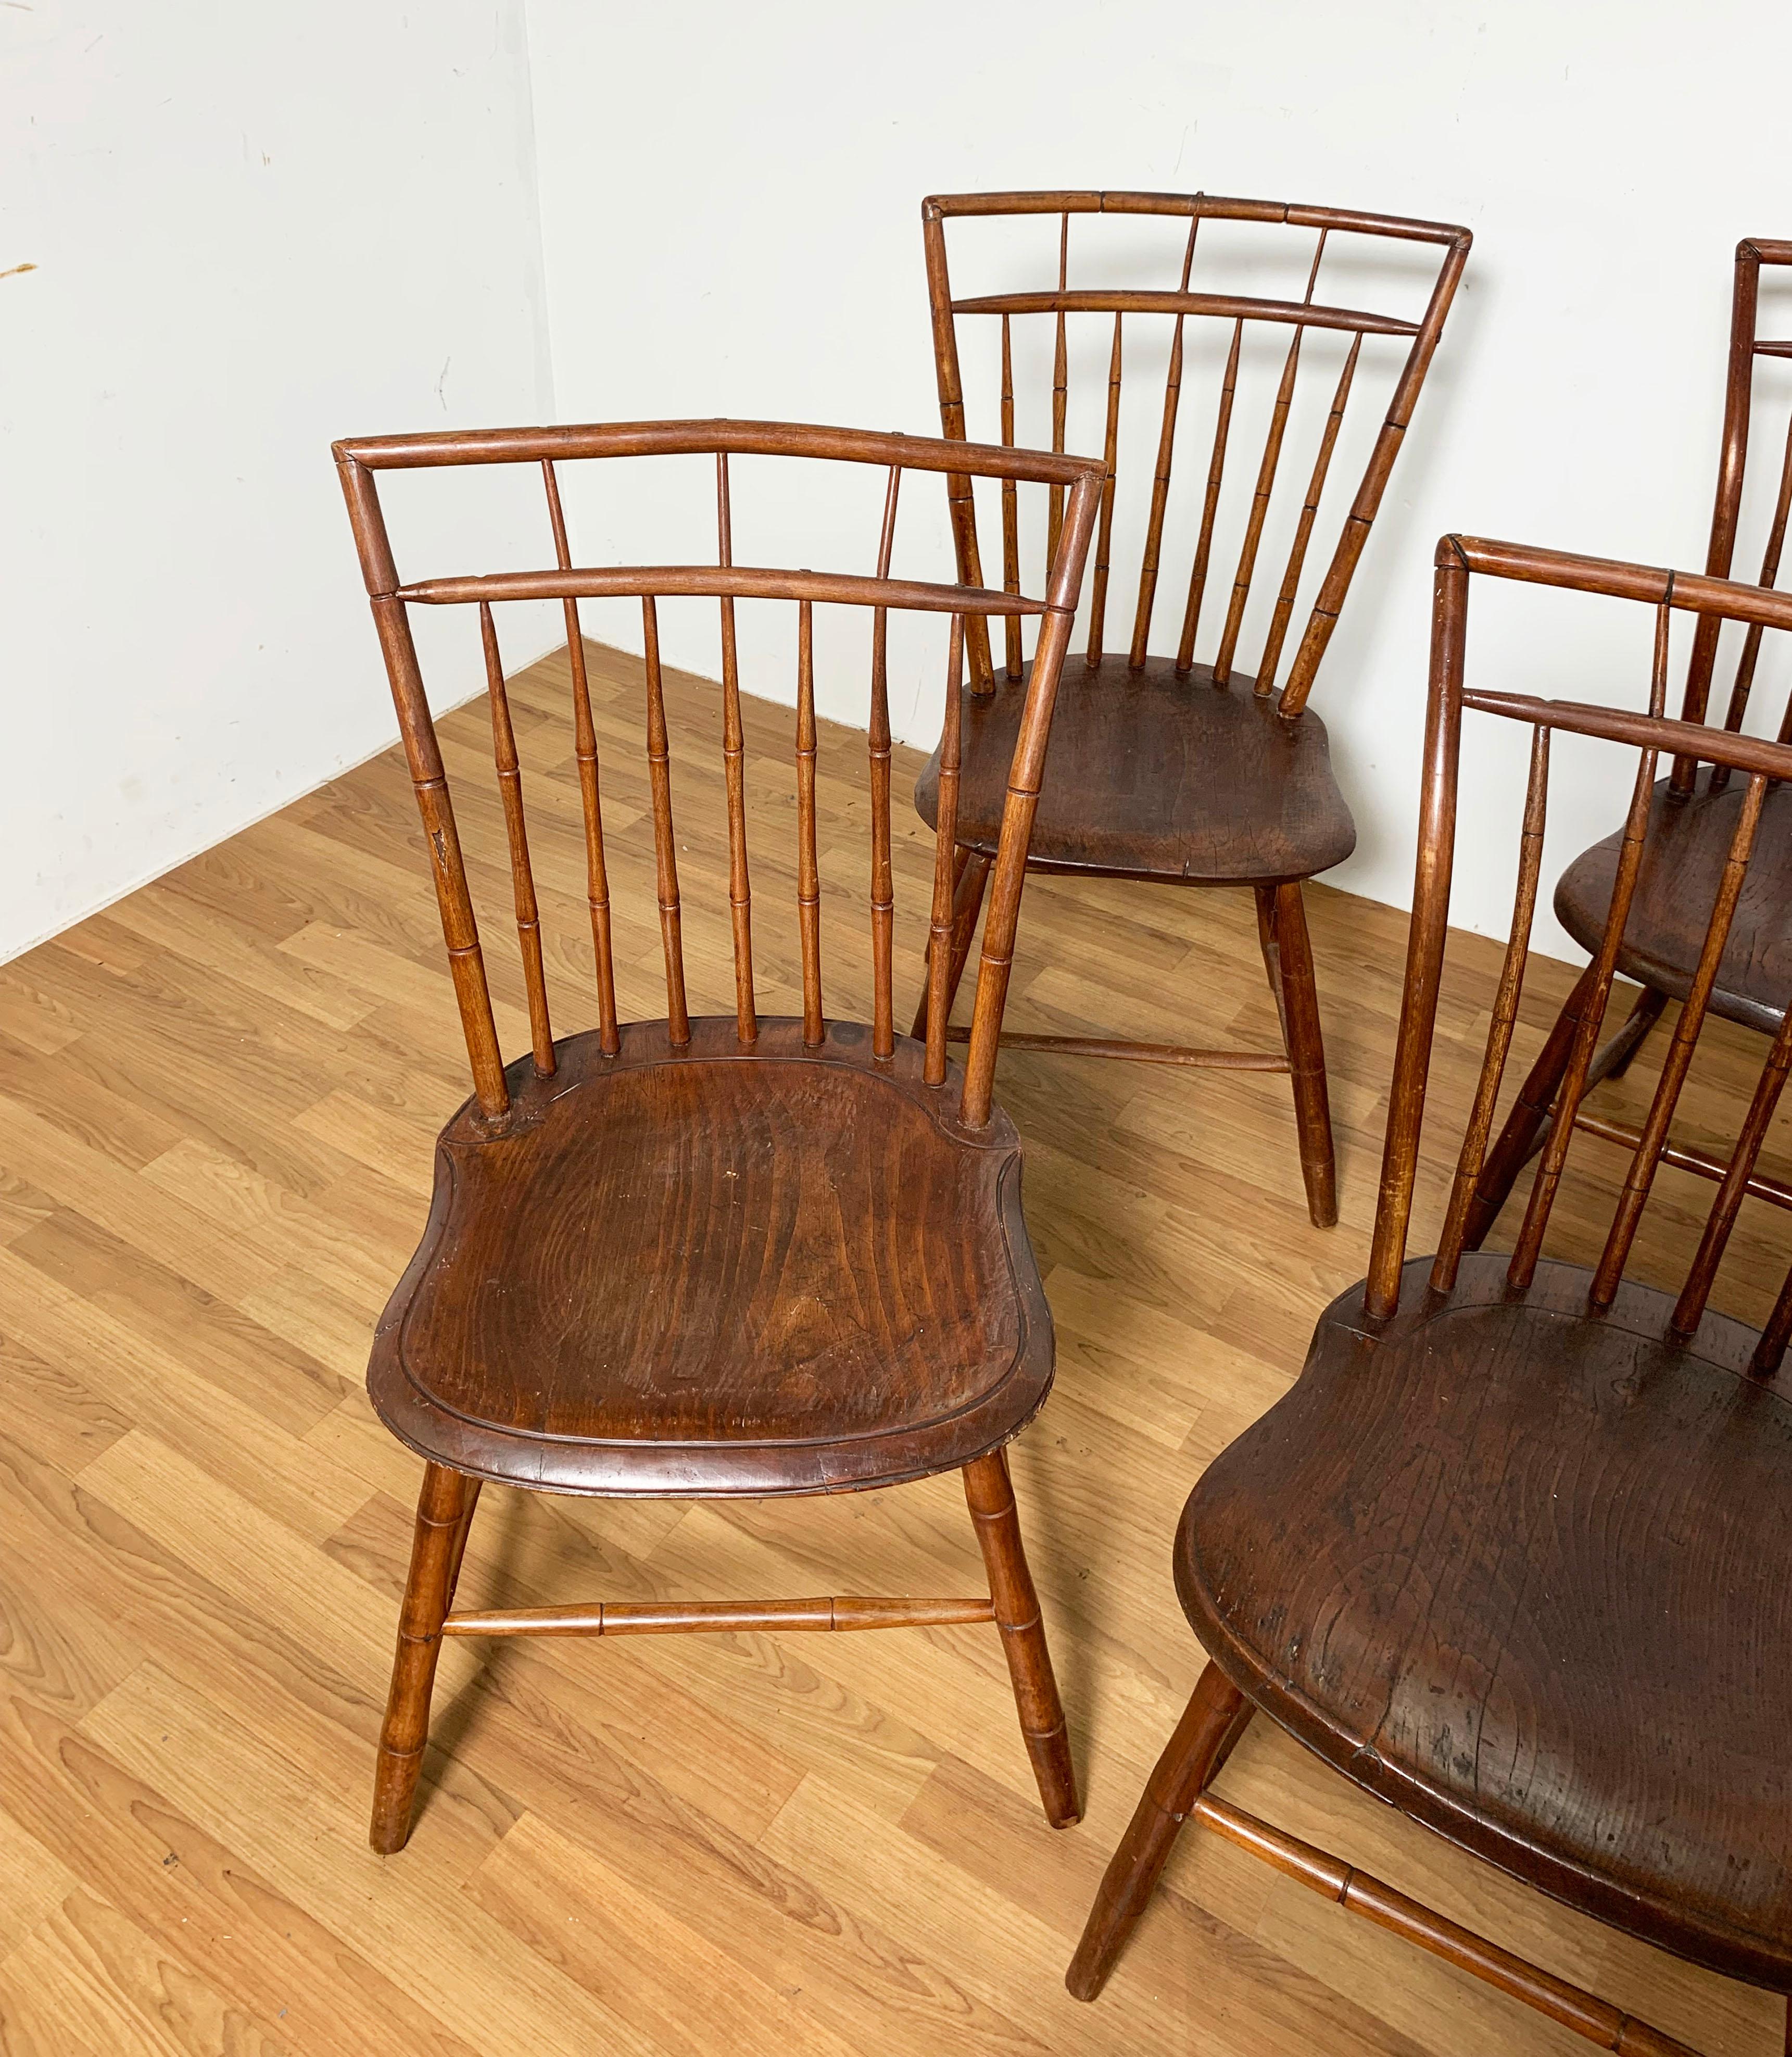 A set of six early 19th century New England birdcage Windsor chairs in cherry with carved pine seats. Several of these still bear labels from Christie’s Auction House, from where they were purchased in the 1980s. Note: one chair varies slightly in